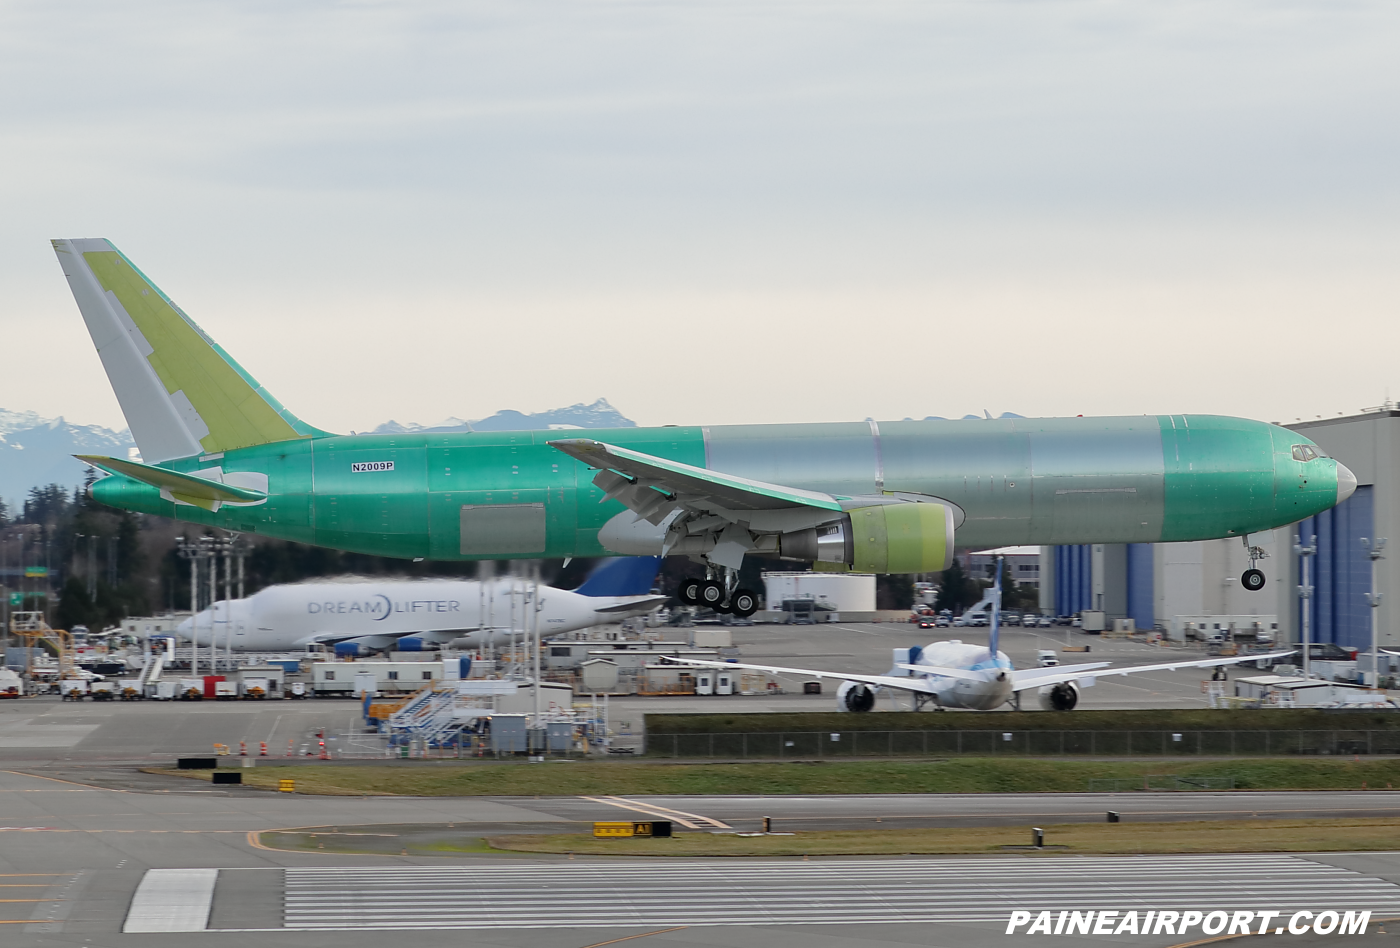 China Longhao 767 at KPAE Paine Field